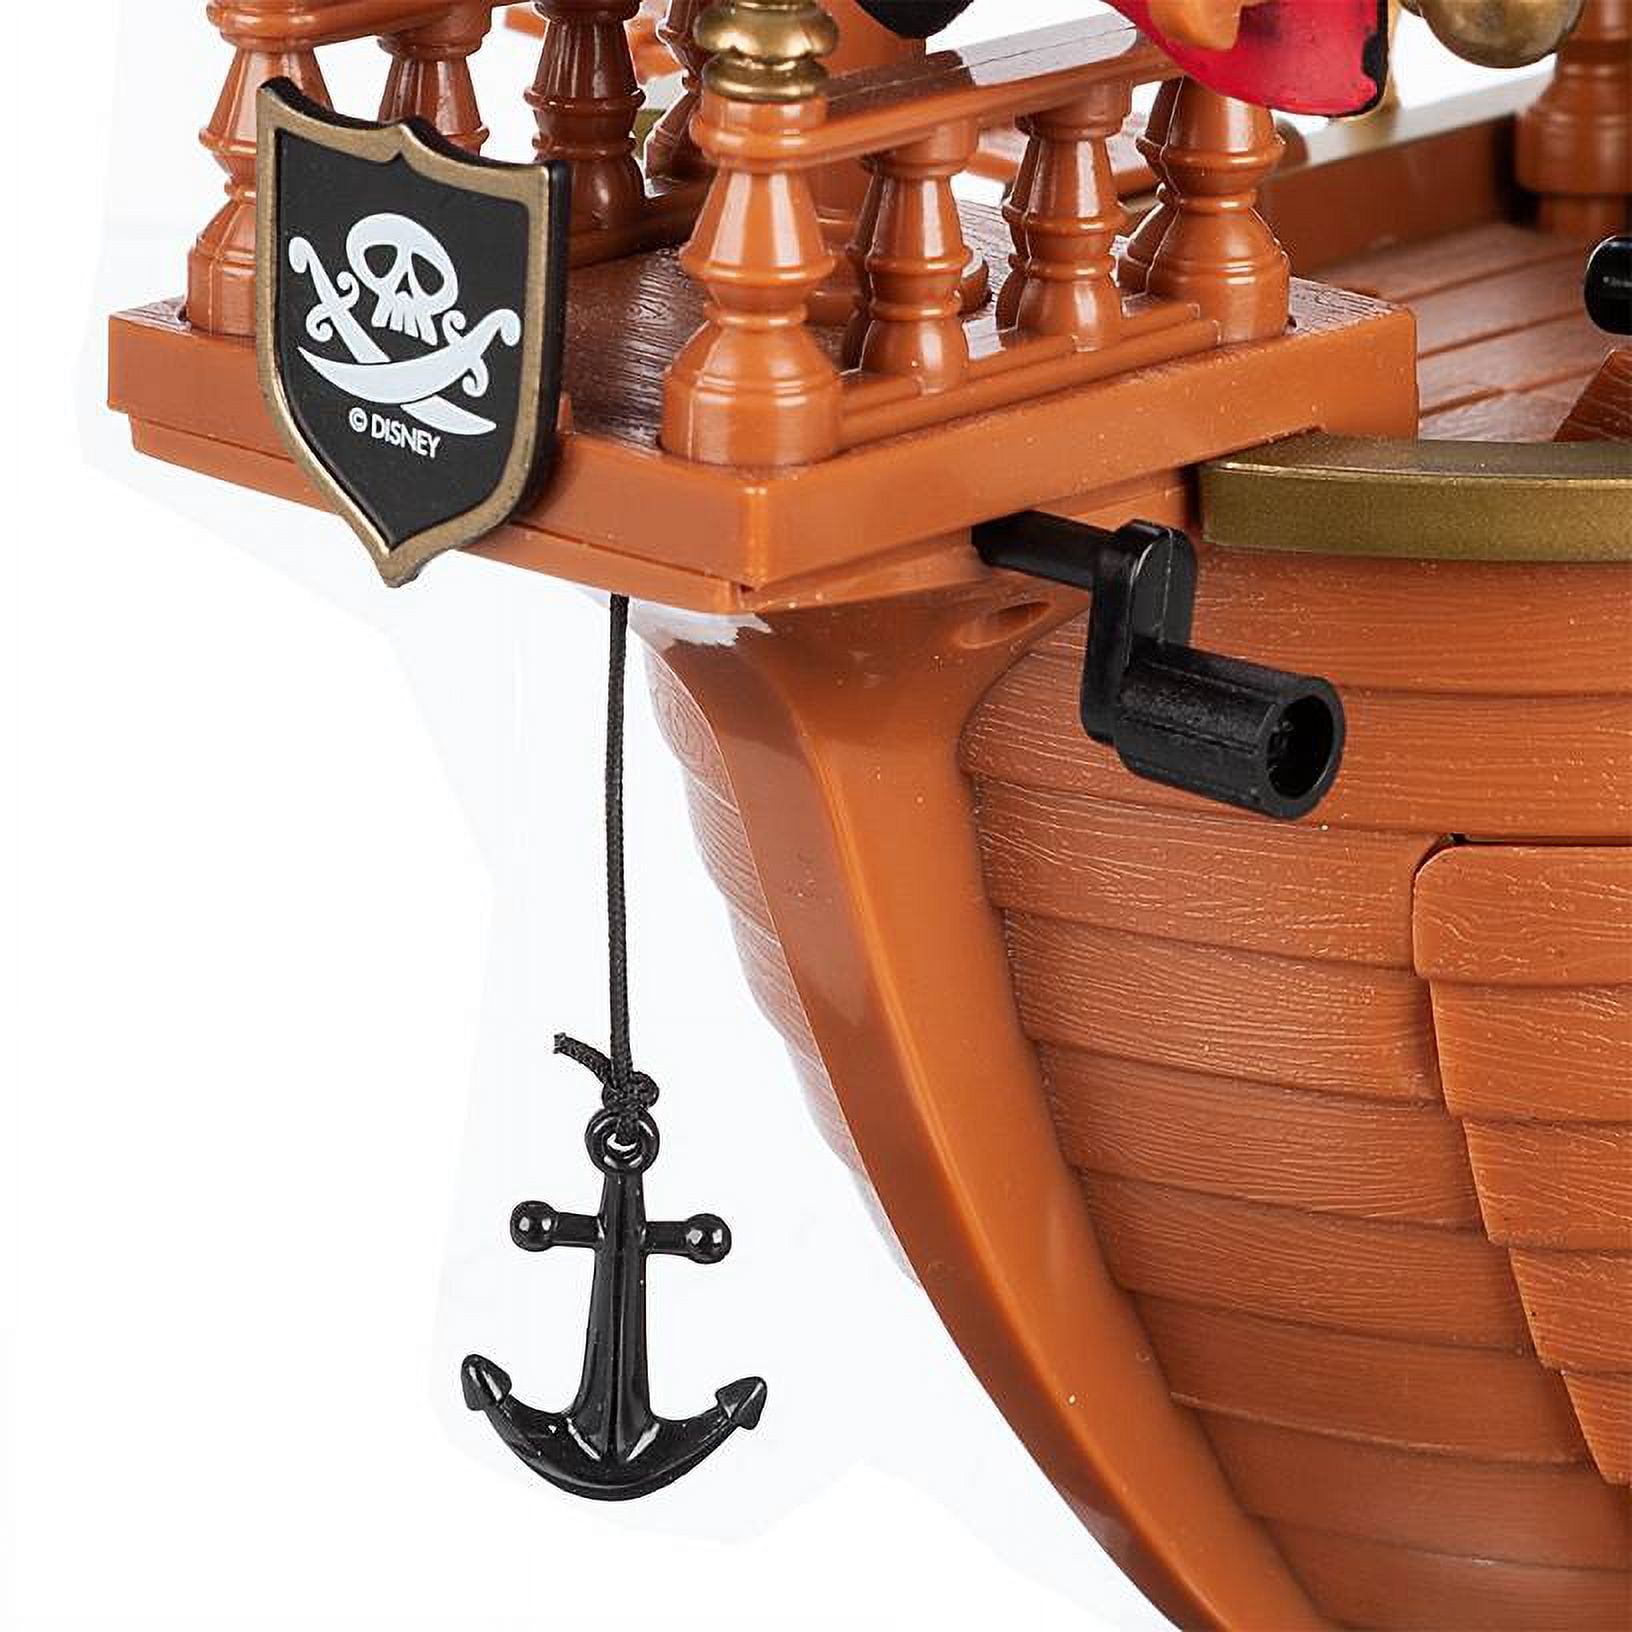 Mickey Mouse and Friends Pirate Ship Play Set – Pirates of the Caribbean